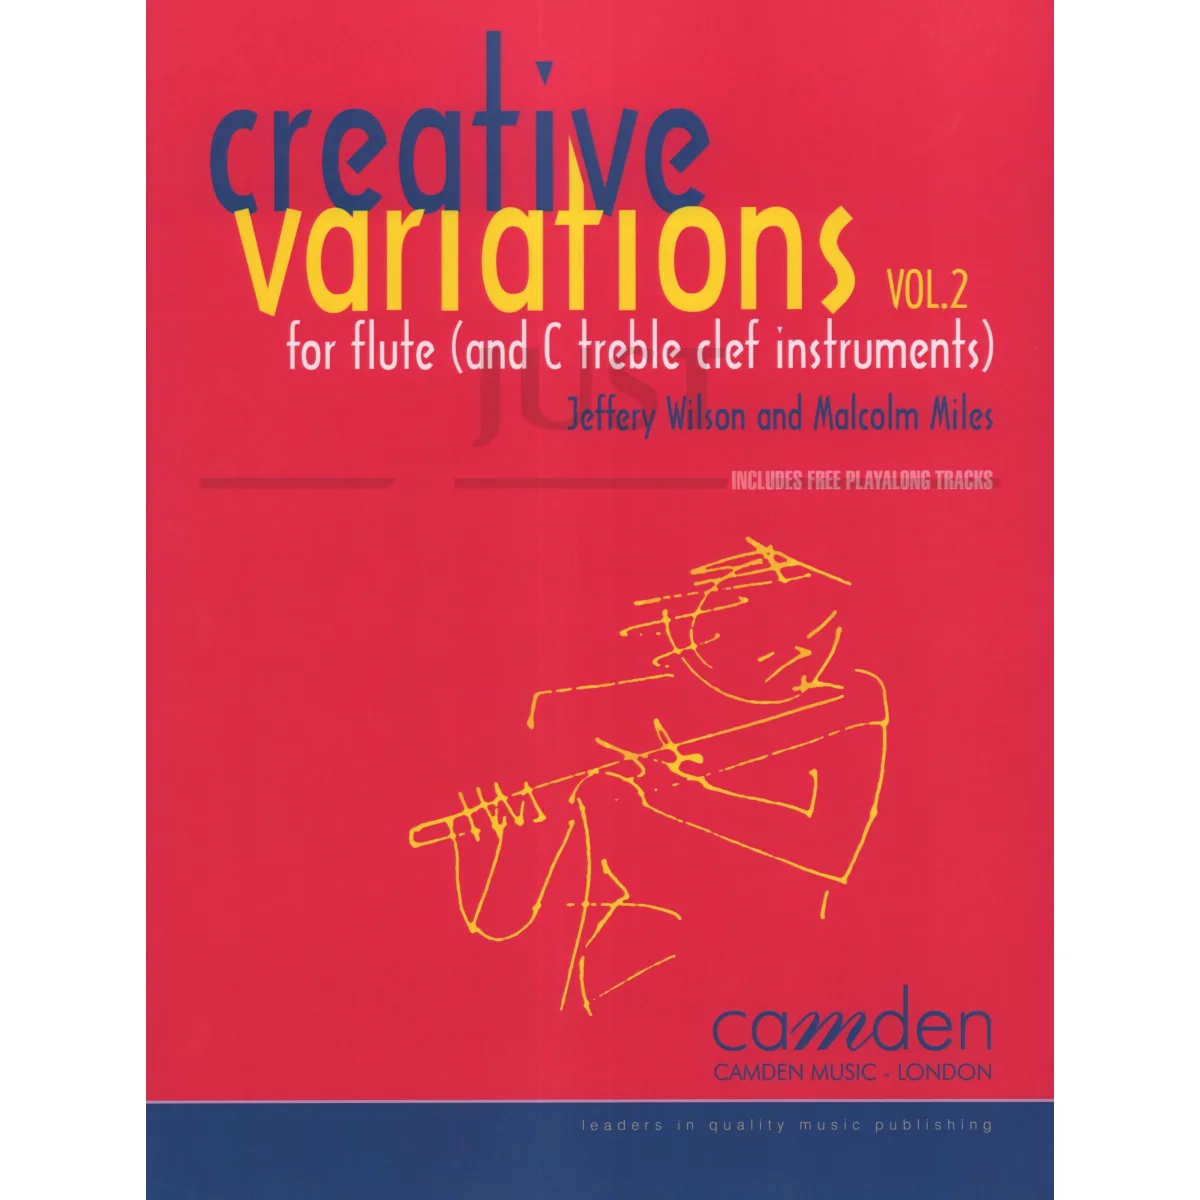 Creative Variations for Flute (and C treble clef instruments)